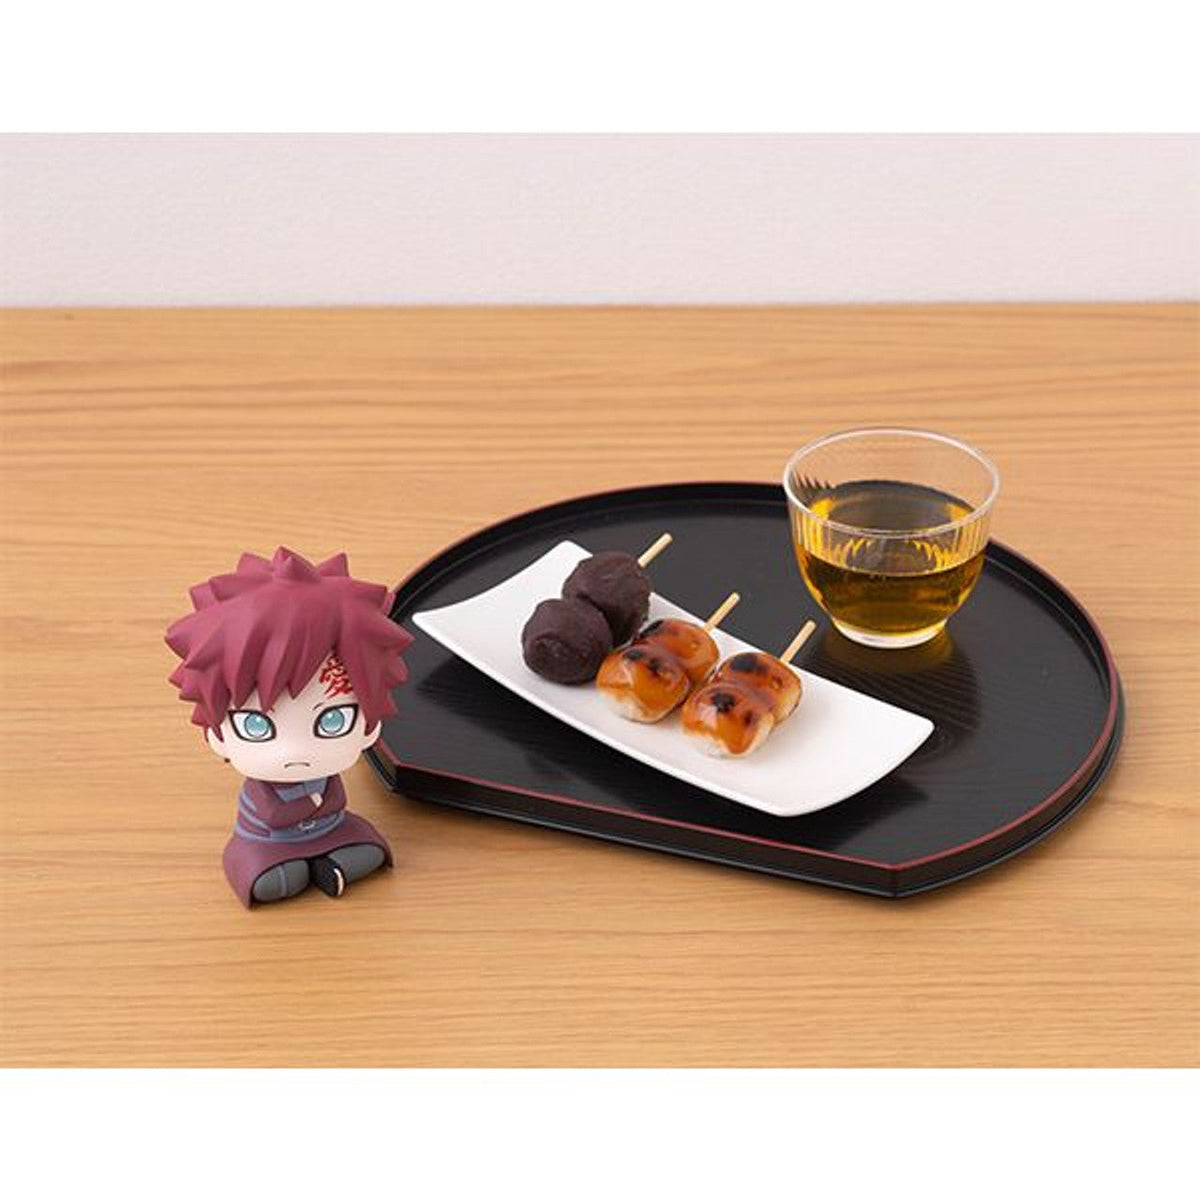 Naruto Shippuden Look Up Series &quot;Gaara&quot;-MegaHouse-Ace Cards &amp; Collectibles